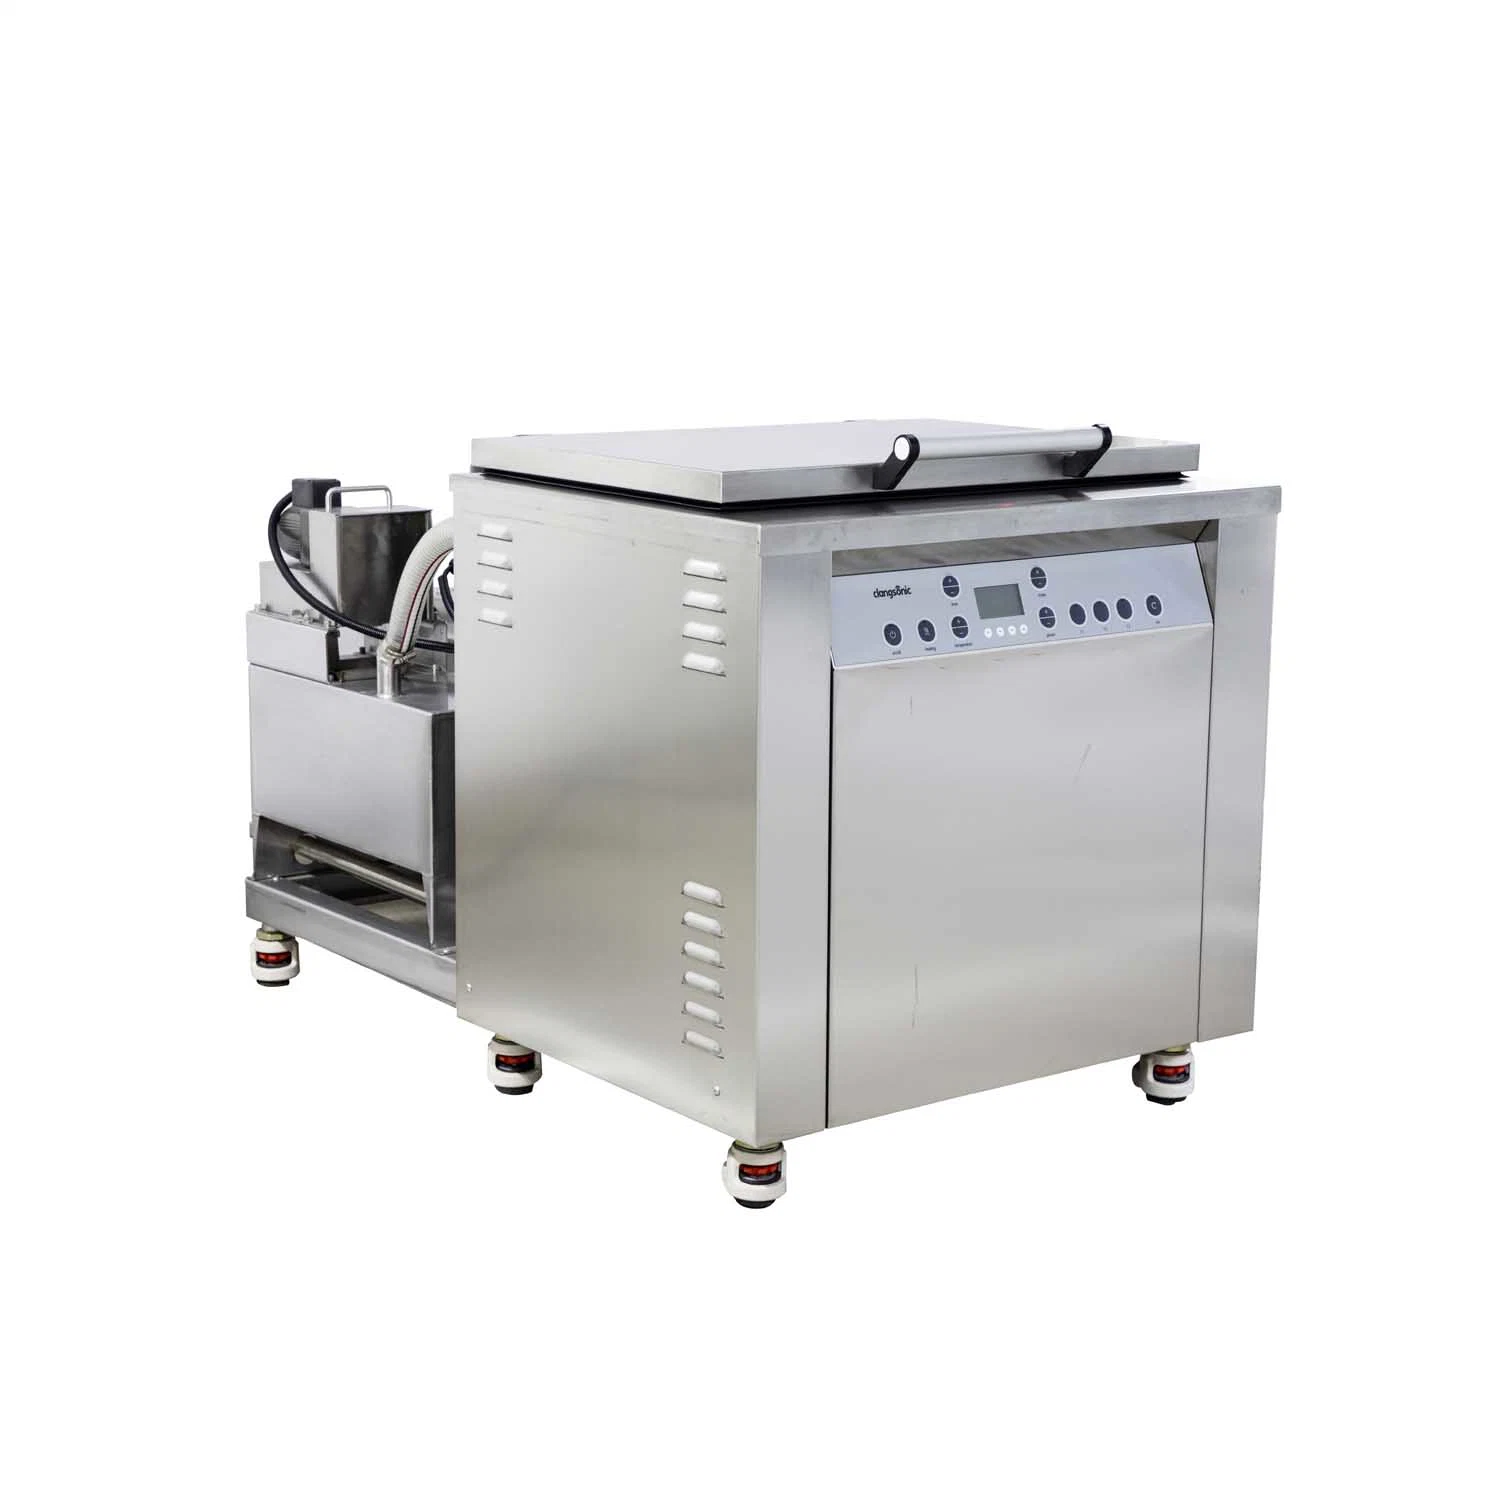 RM120 Ultrasonic Parts Cleaner Hot Water Wash Machine Ultrasonic Mechanical Cleaning Equipment for Lab Use